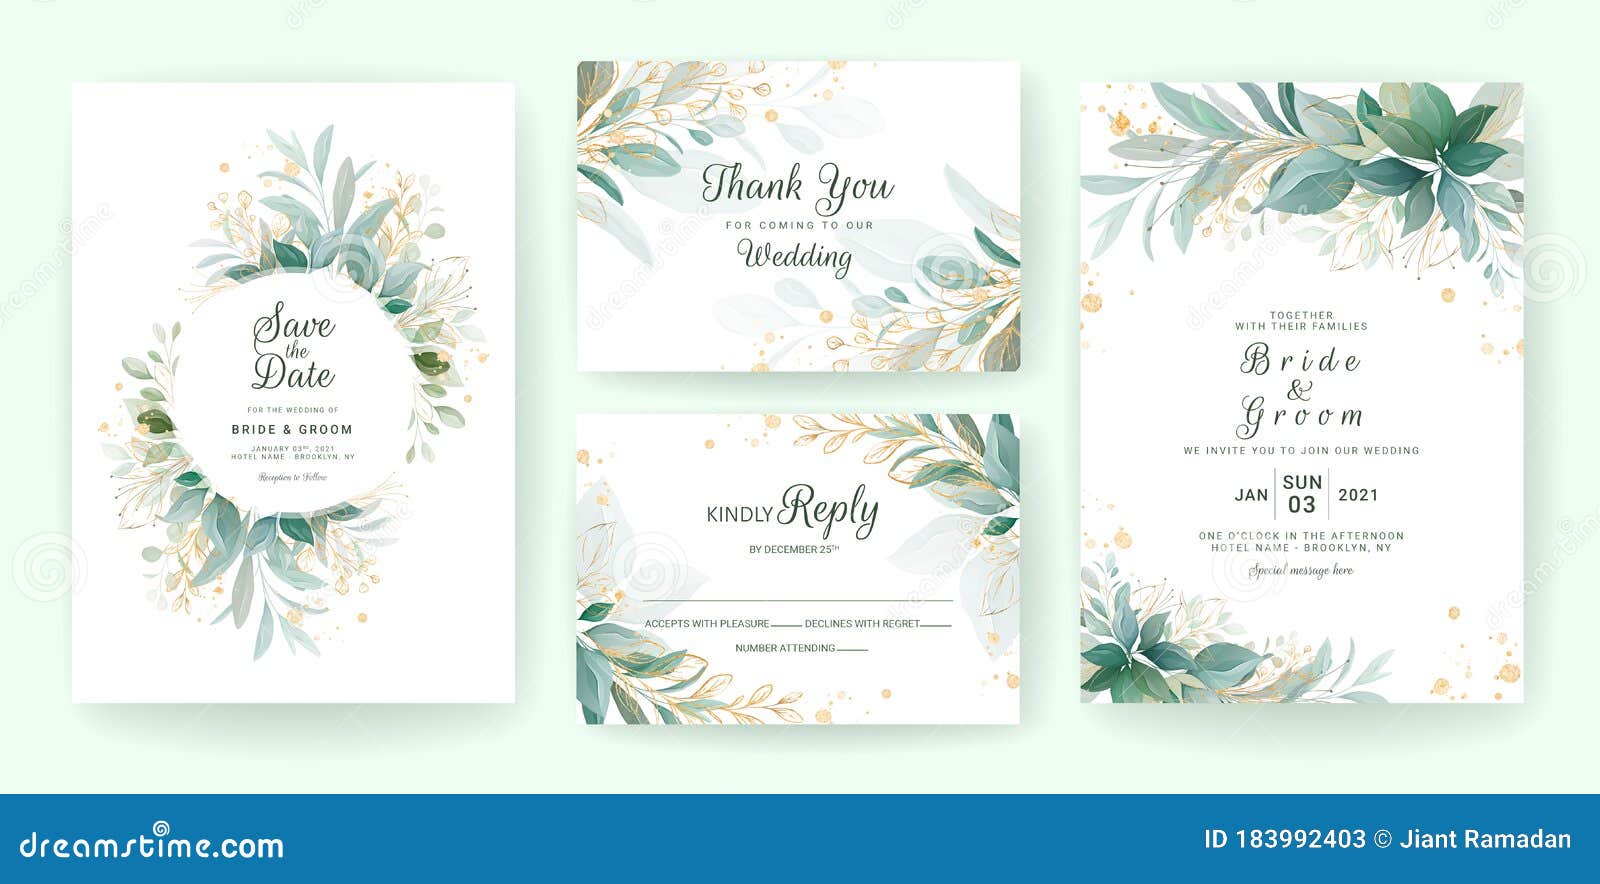 golden greenery wedding invitation template set with leaves, glitter, frame, and border. floral decoration  for save the